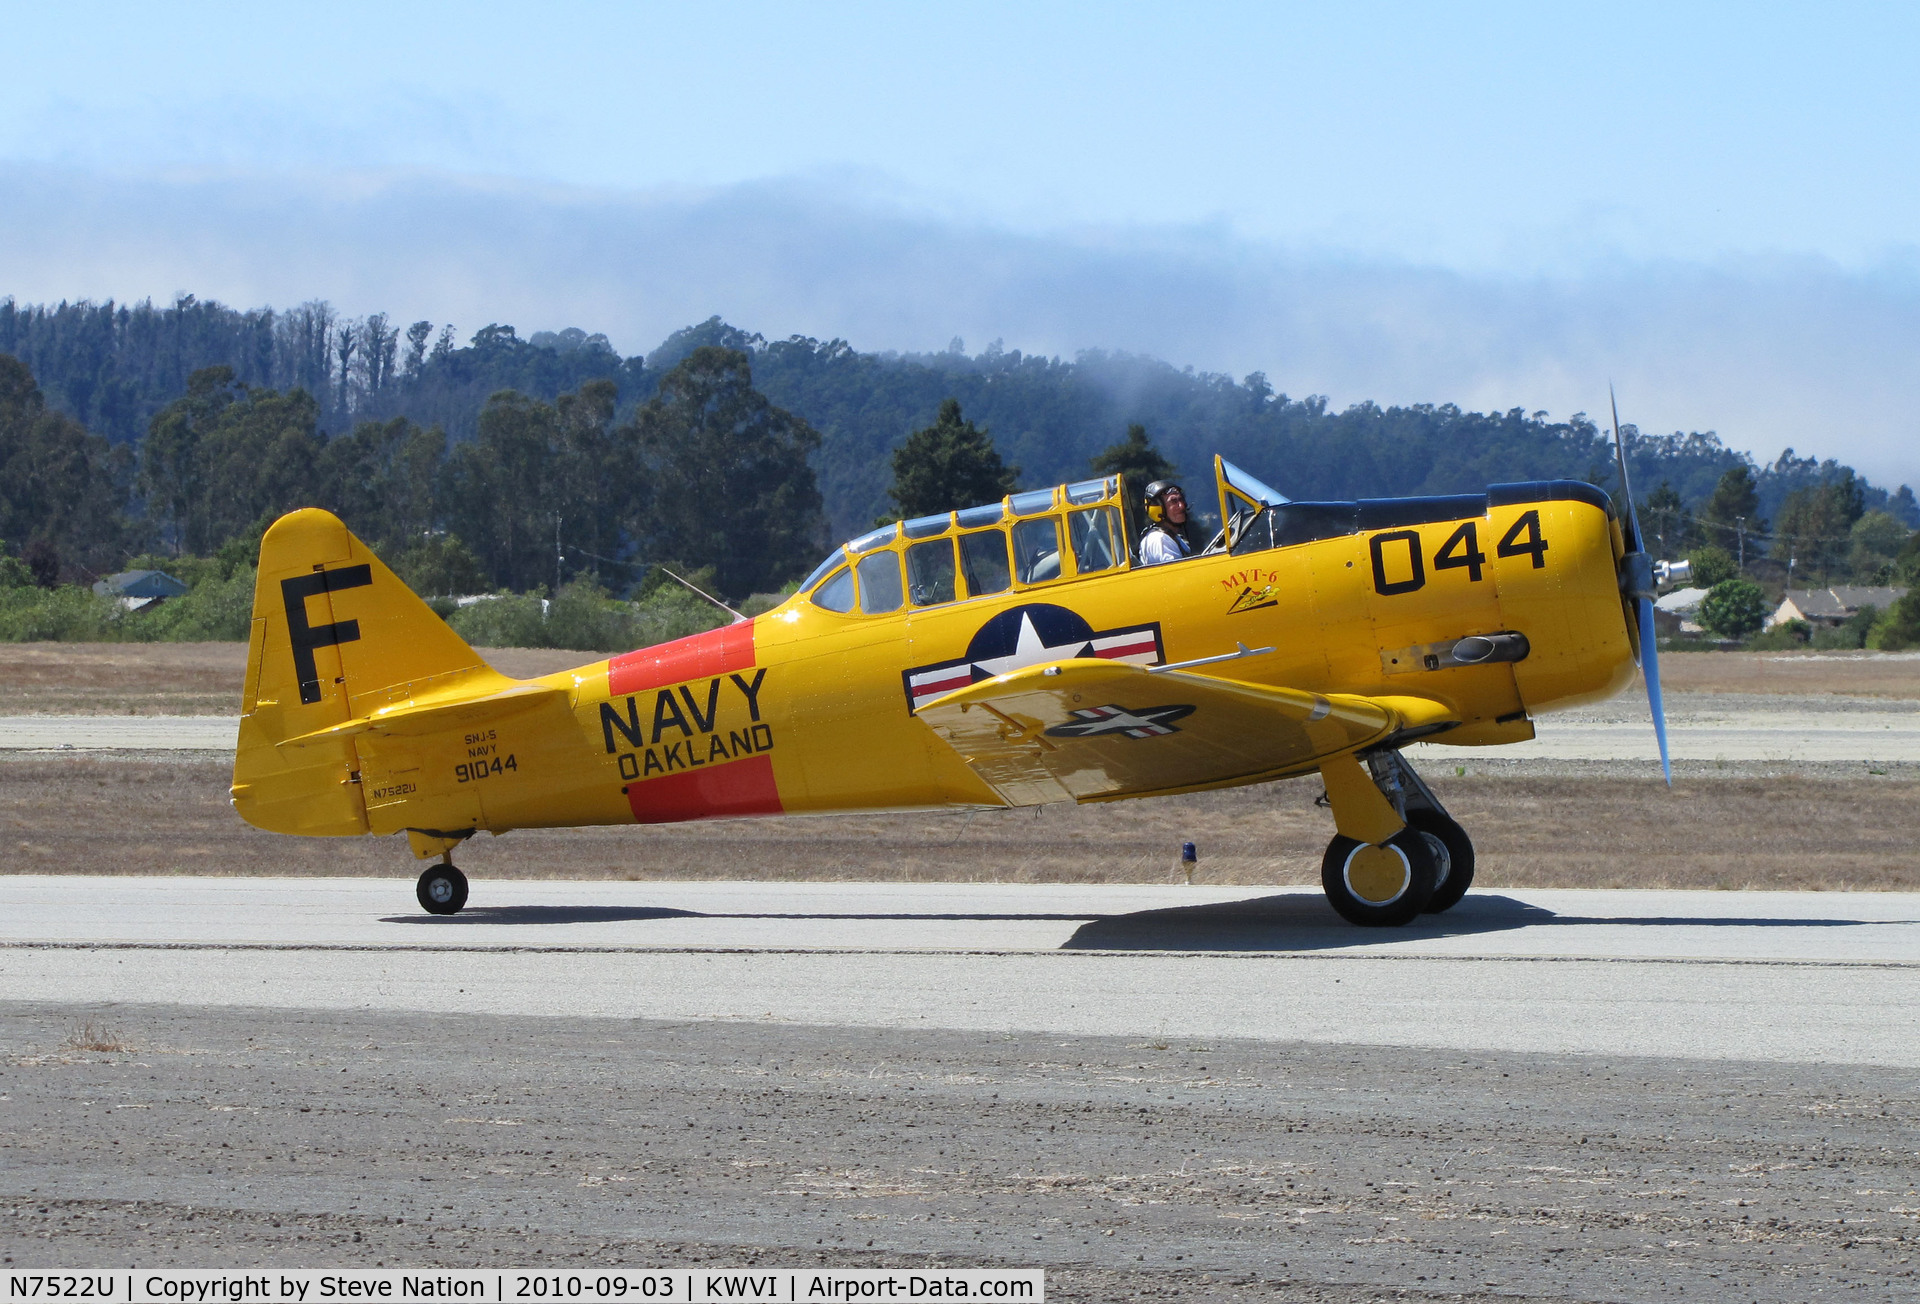 N7522U, 1952 Canadian Car & Foundry Harvard MK IV C/N CCF4-214, 1952 CCF Harvard Mk IV painted as USN SNJ-5 BuAer 91044 F/044 Navy OAKLAND yellow cs & red band taxying @ Watsonville Fly-In